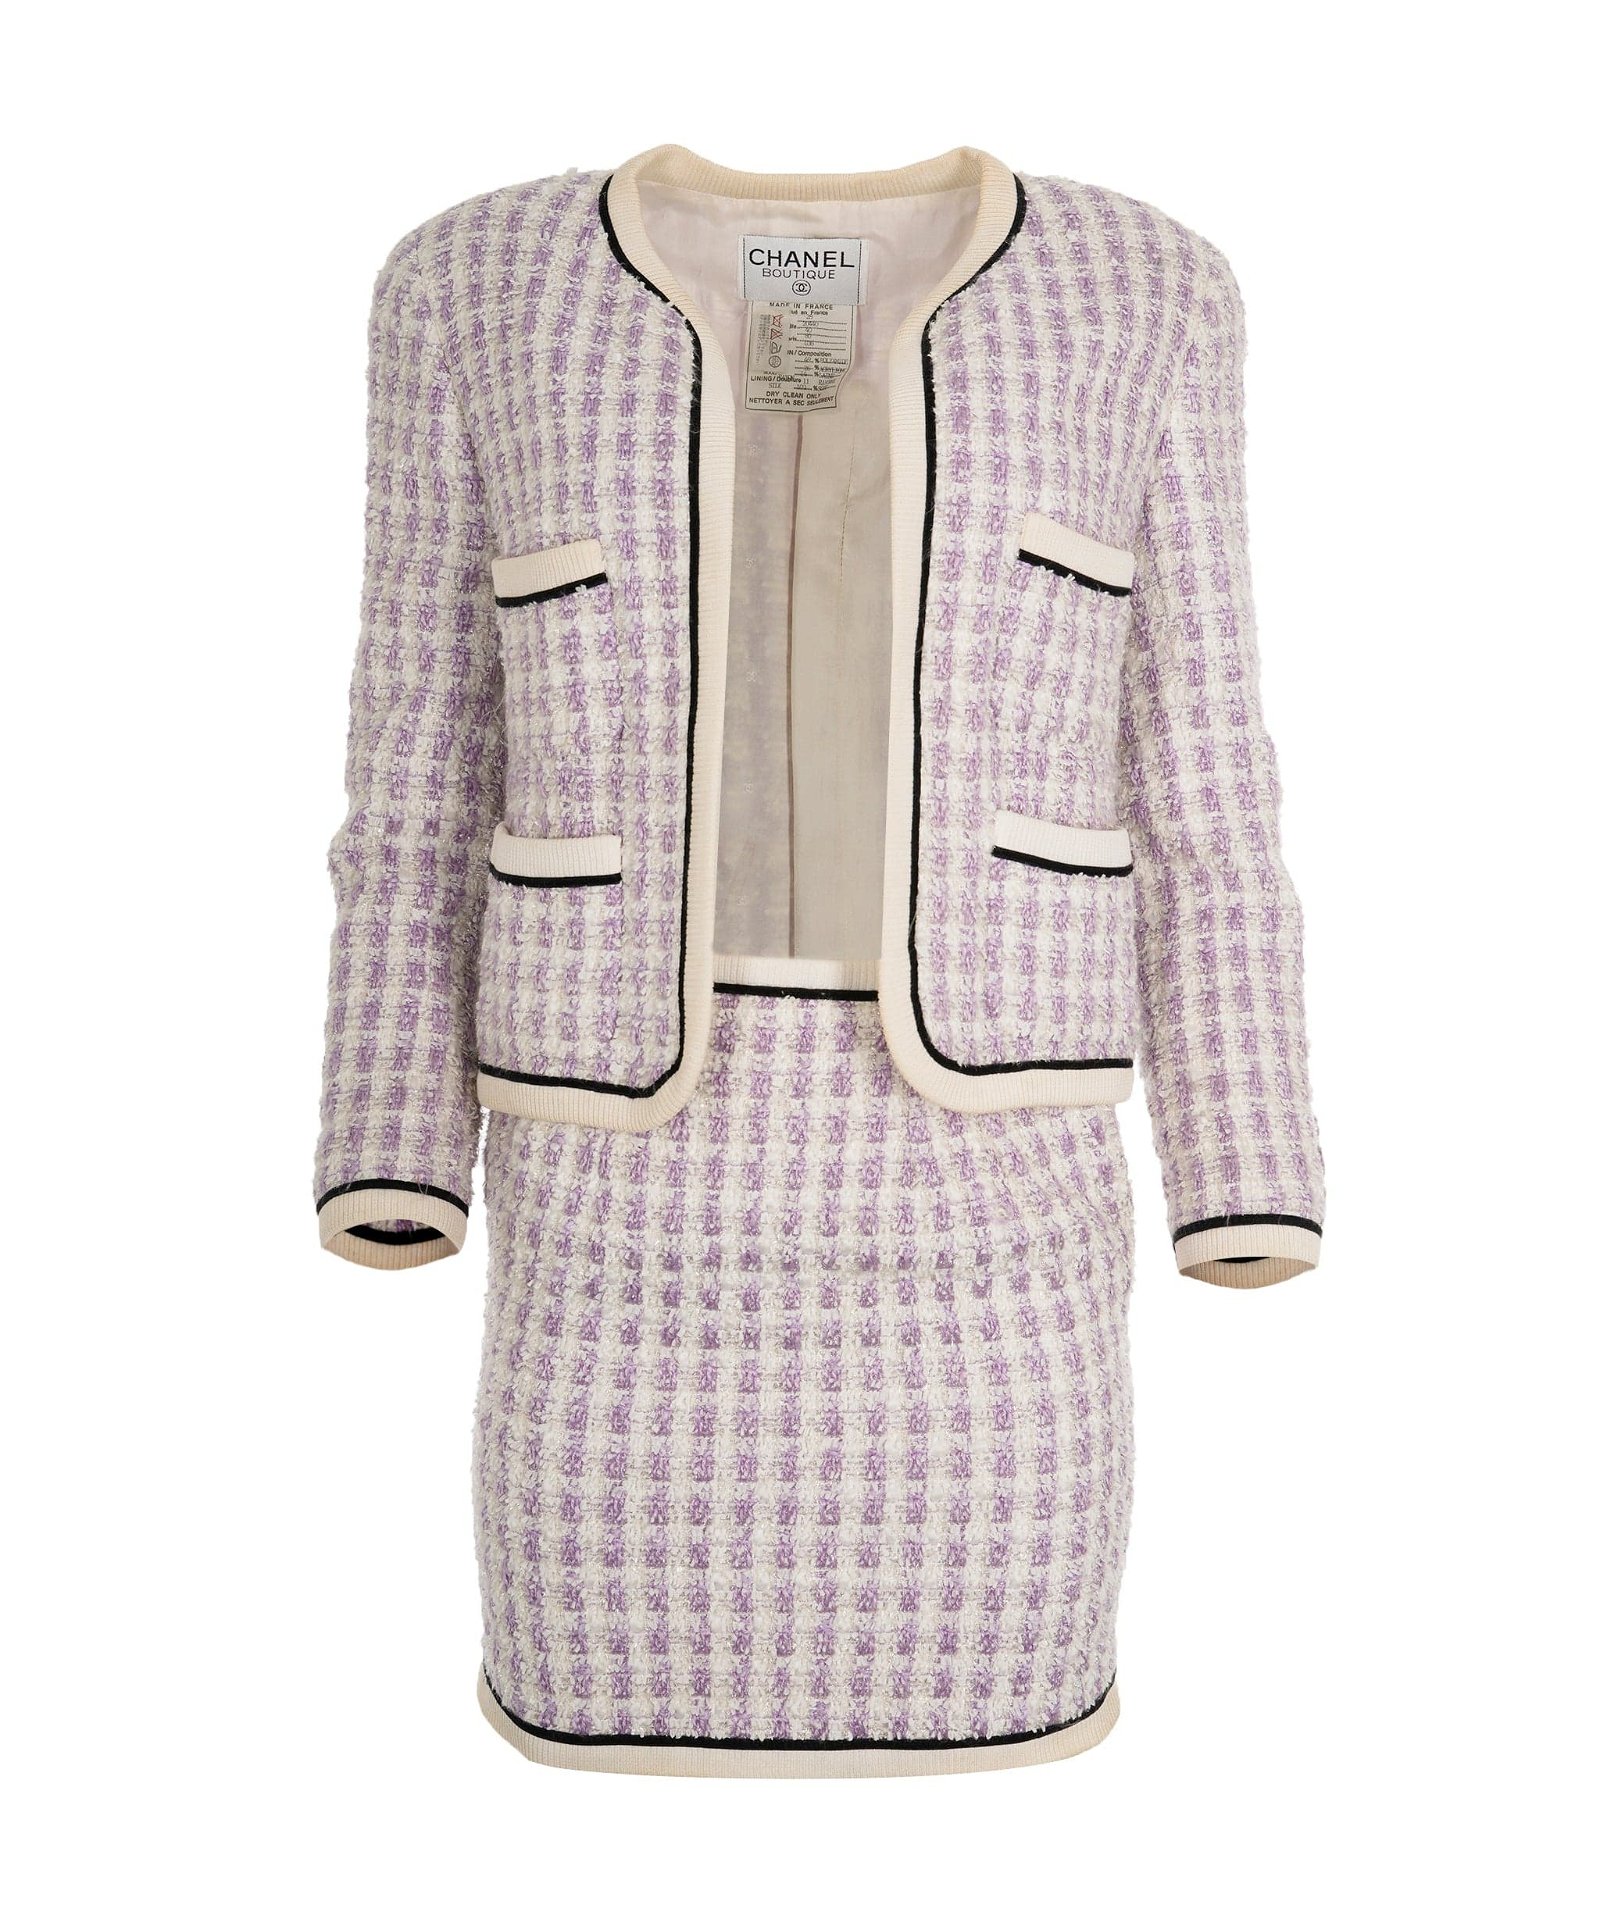 Image of CHANEL PURPLE HOUNDTOOTH CHANEL SUIT SZ 40 UKL1413